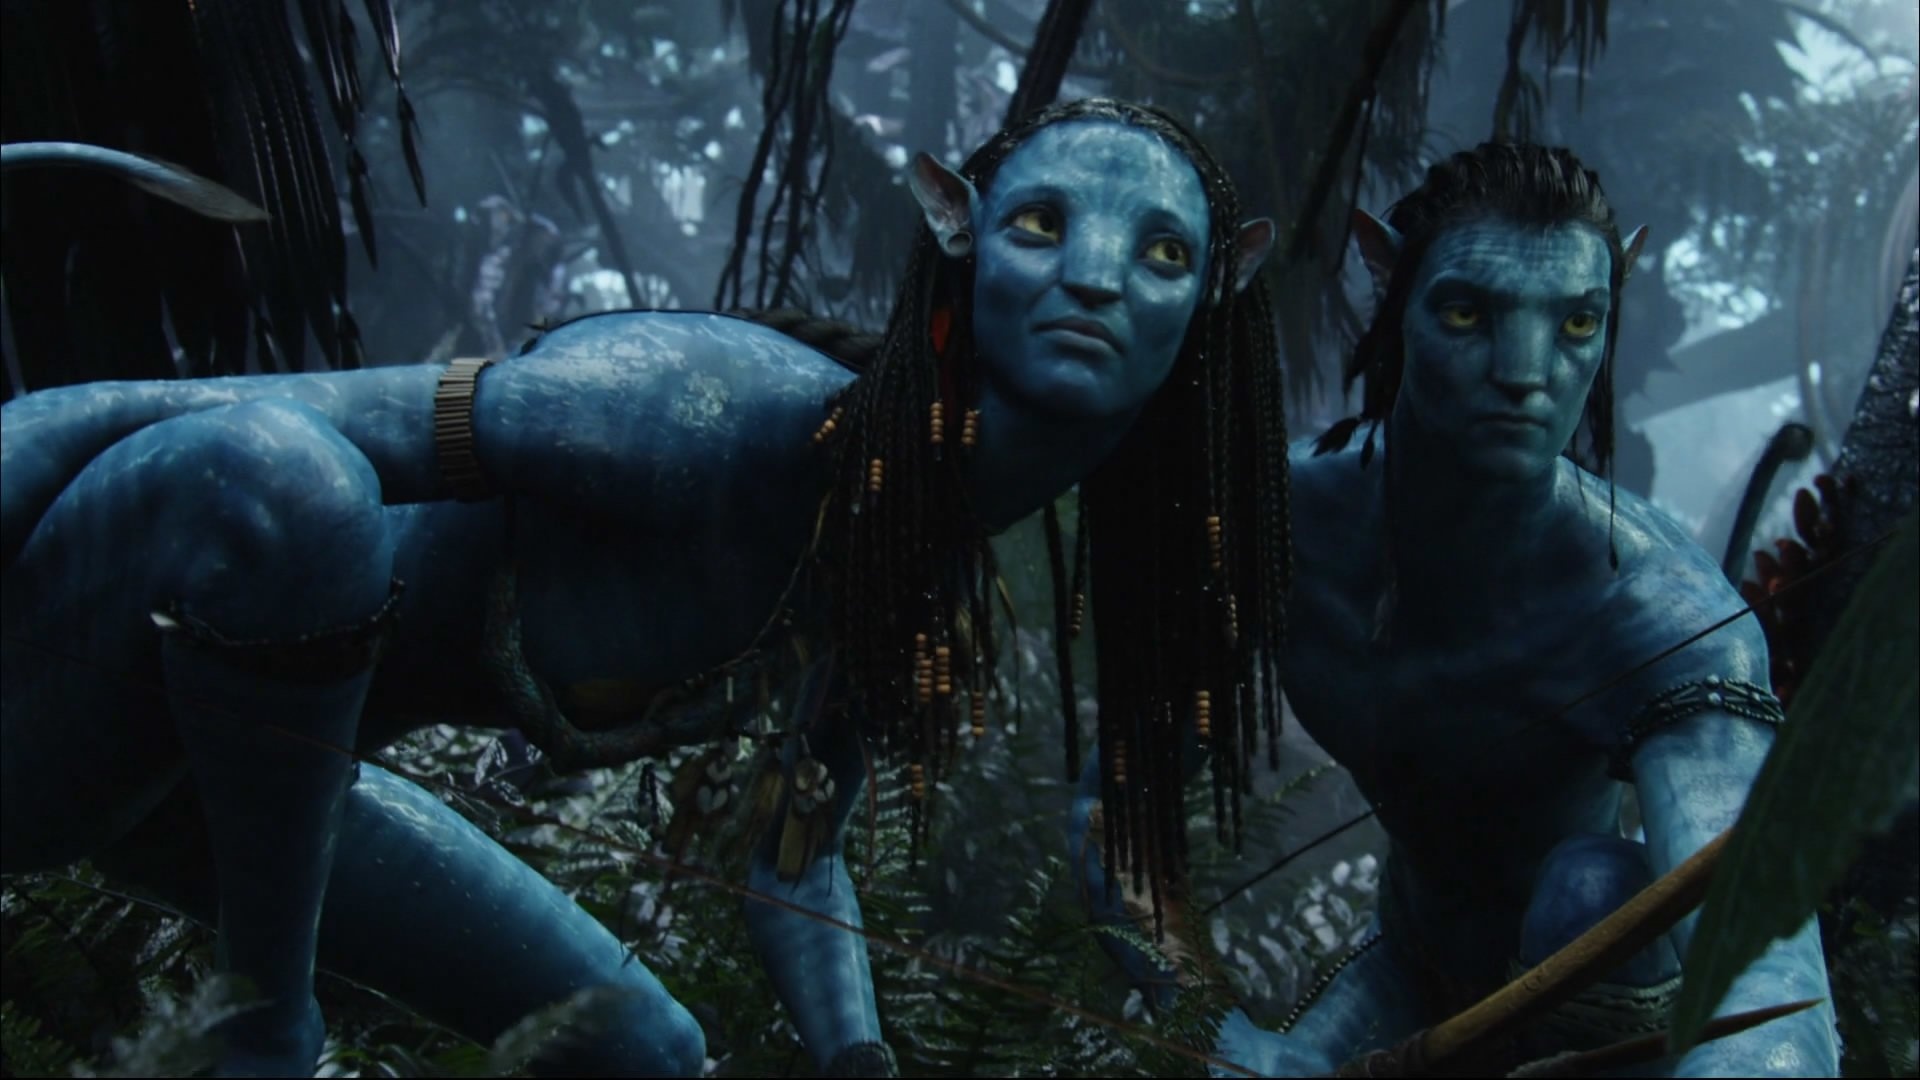 Avatar HD wallpapers, Background images, 1920x1080 Full HD Desktop